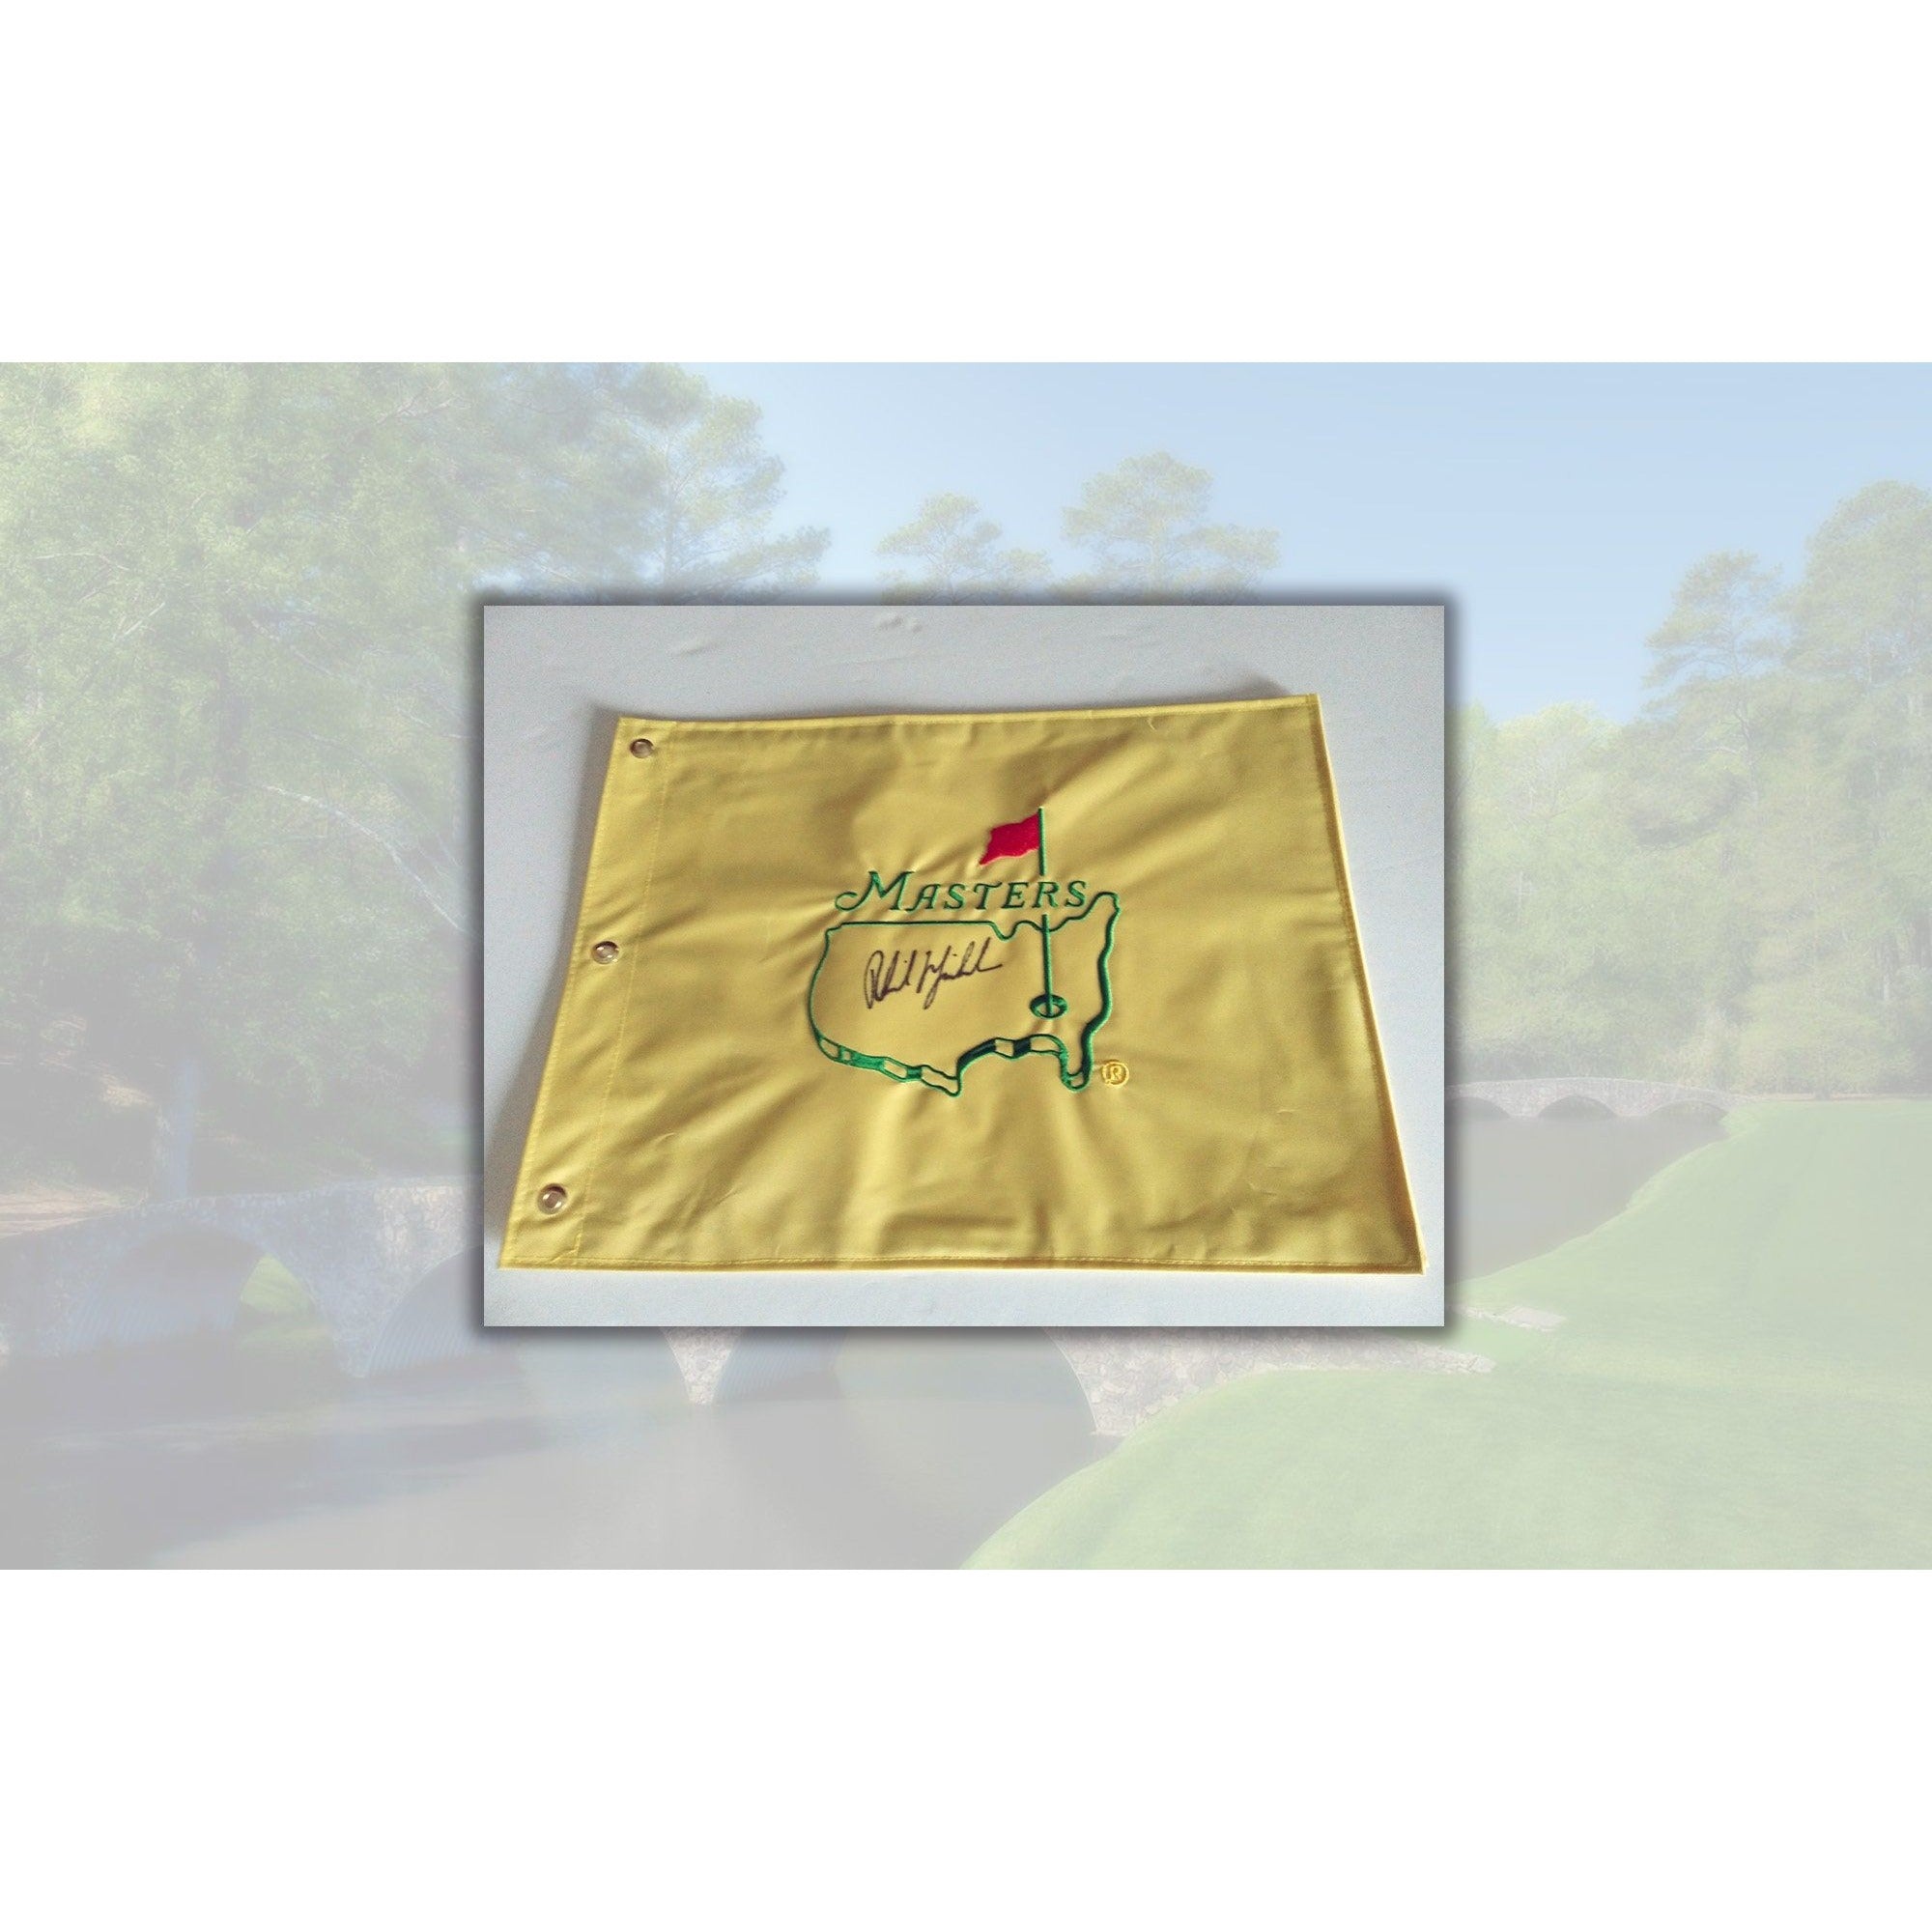 Phil Mickelson Masters Golf pin flag signed with proof